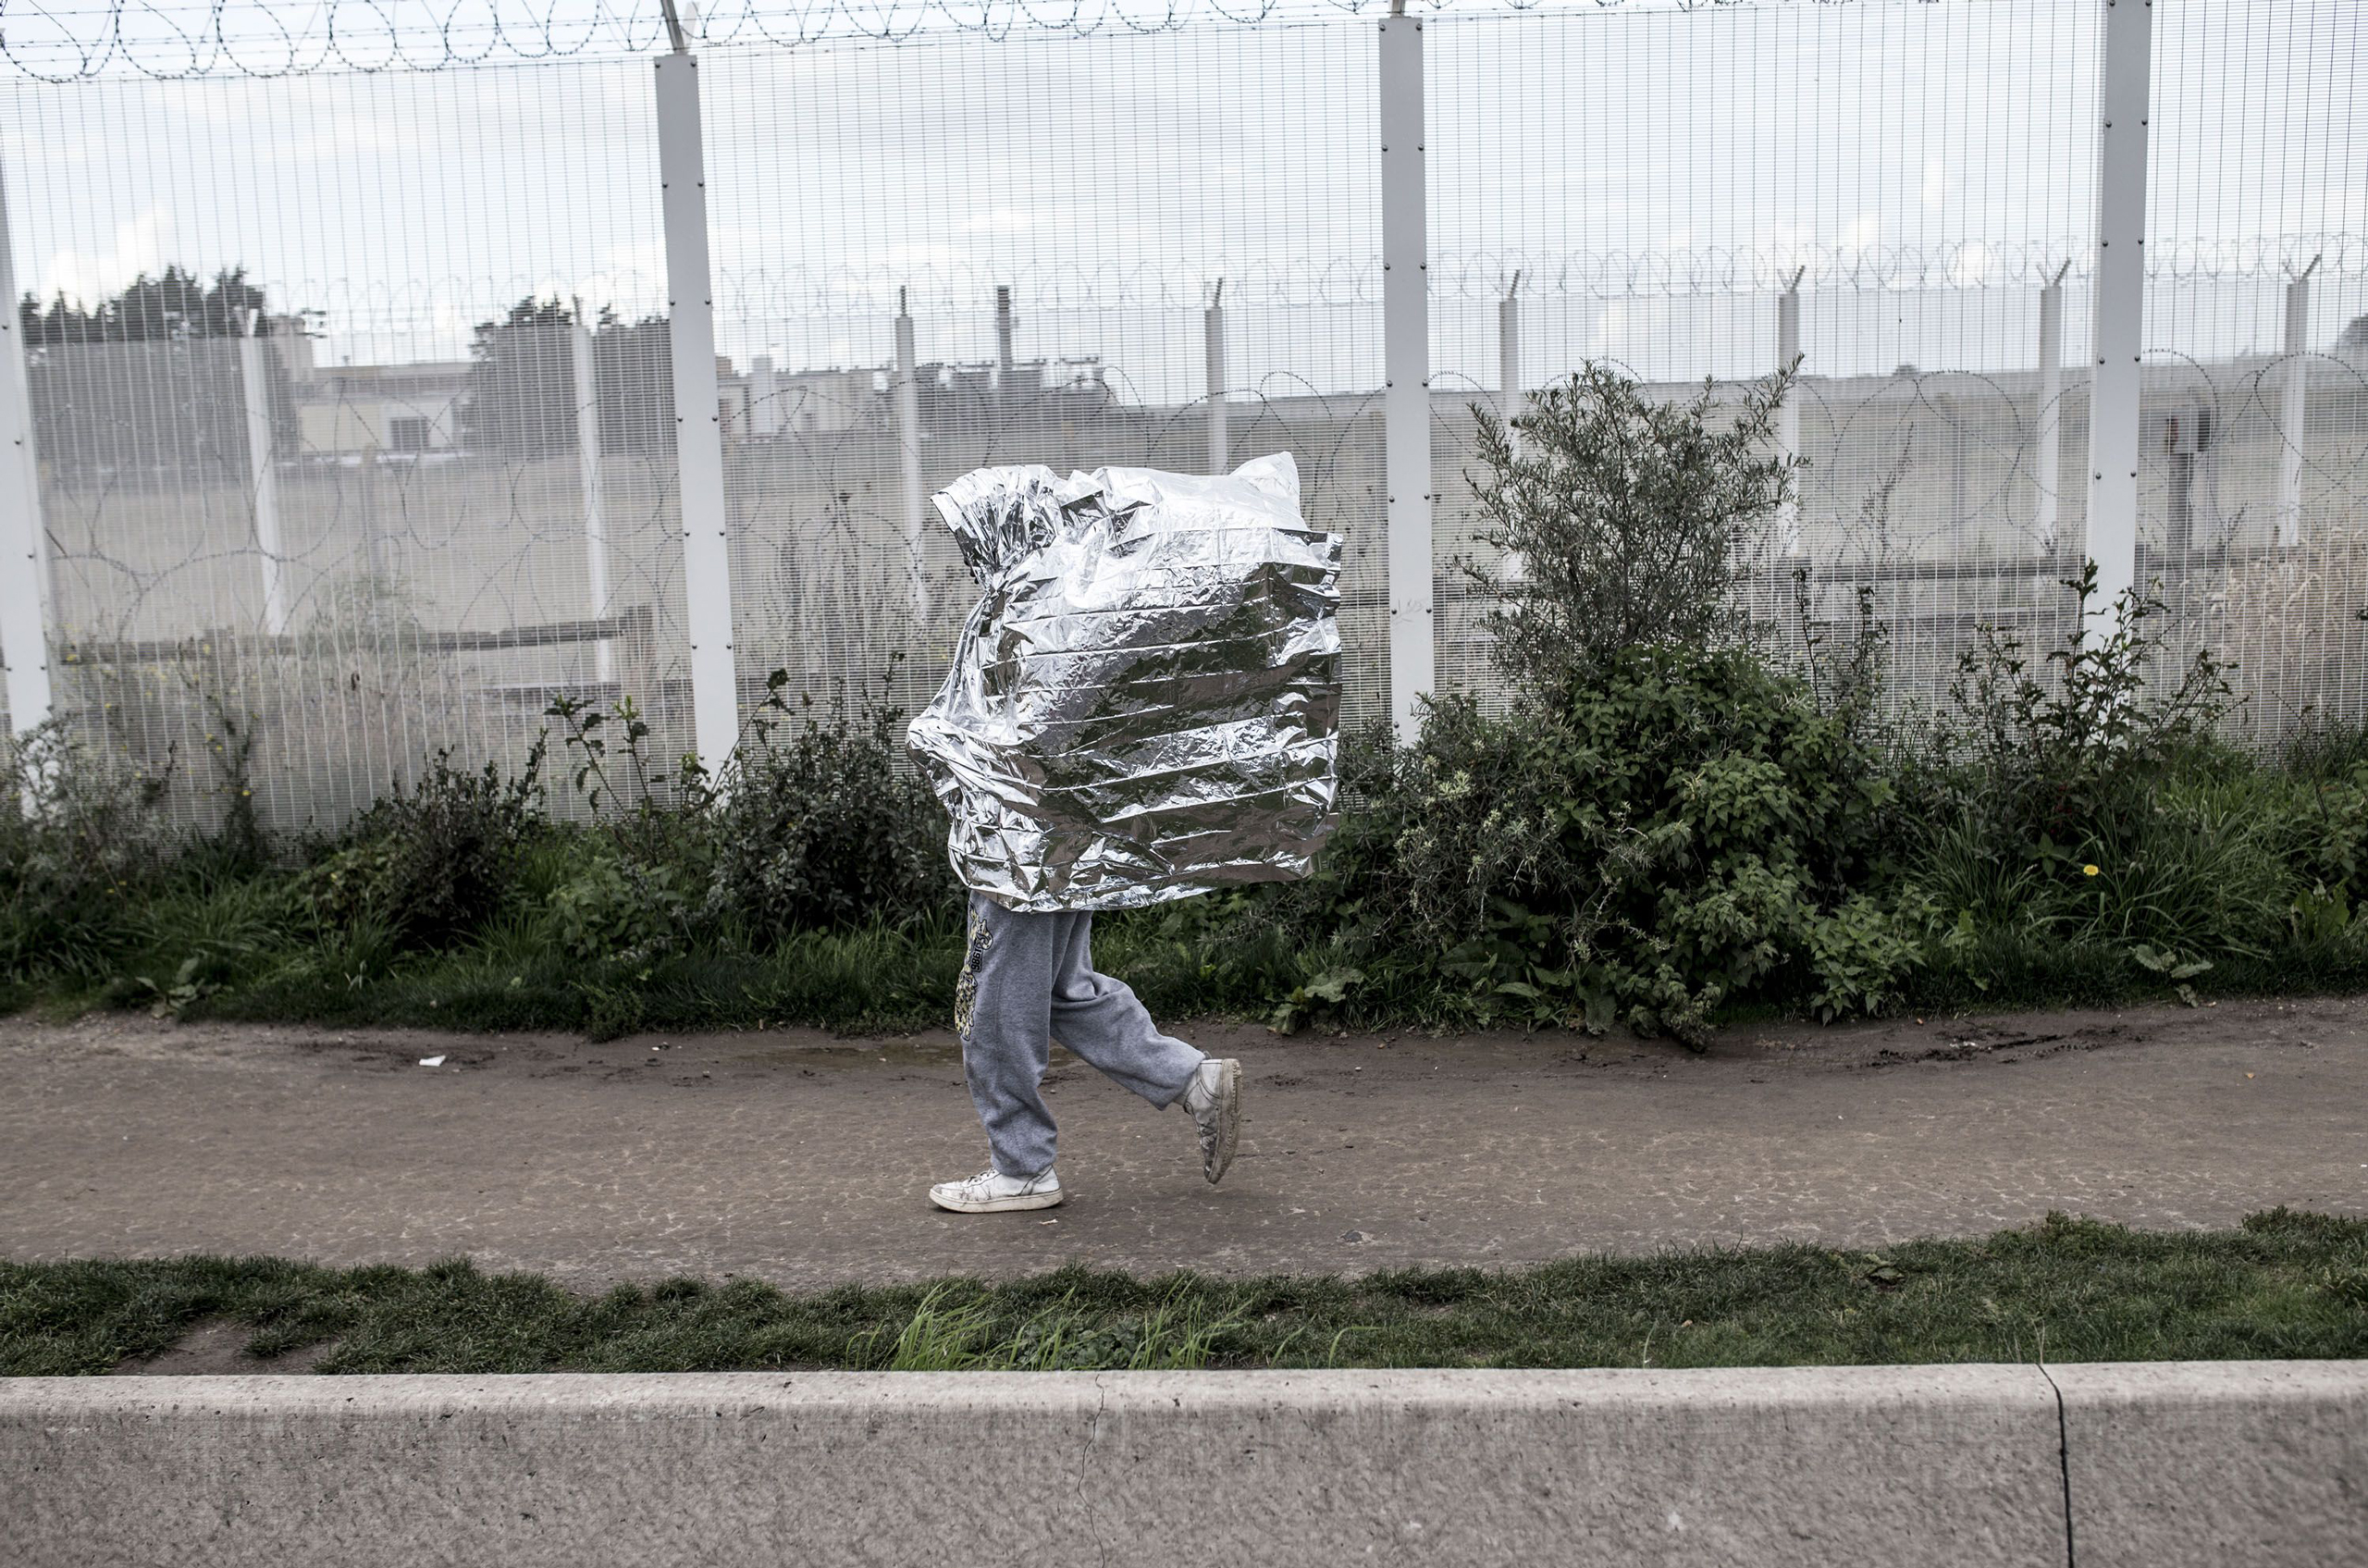 A resident of the refugee camp called 'The Jungle' walking with a survival blanket in Calais, France, on Oct. 17, 2016. (Barbaros Kayan—MOKU/SIPA/AP)